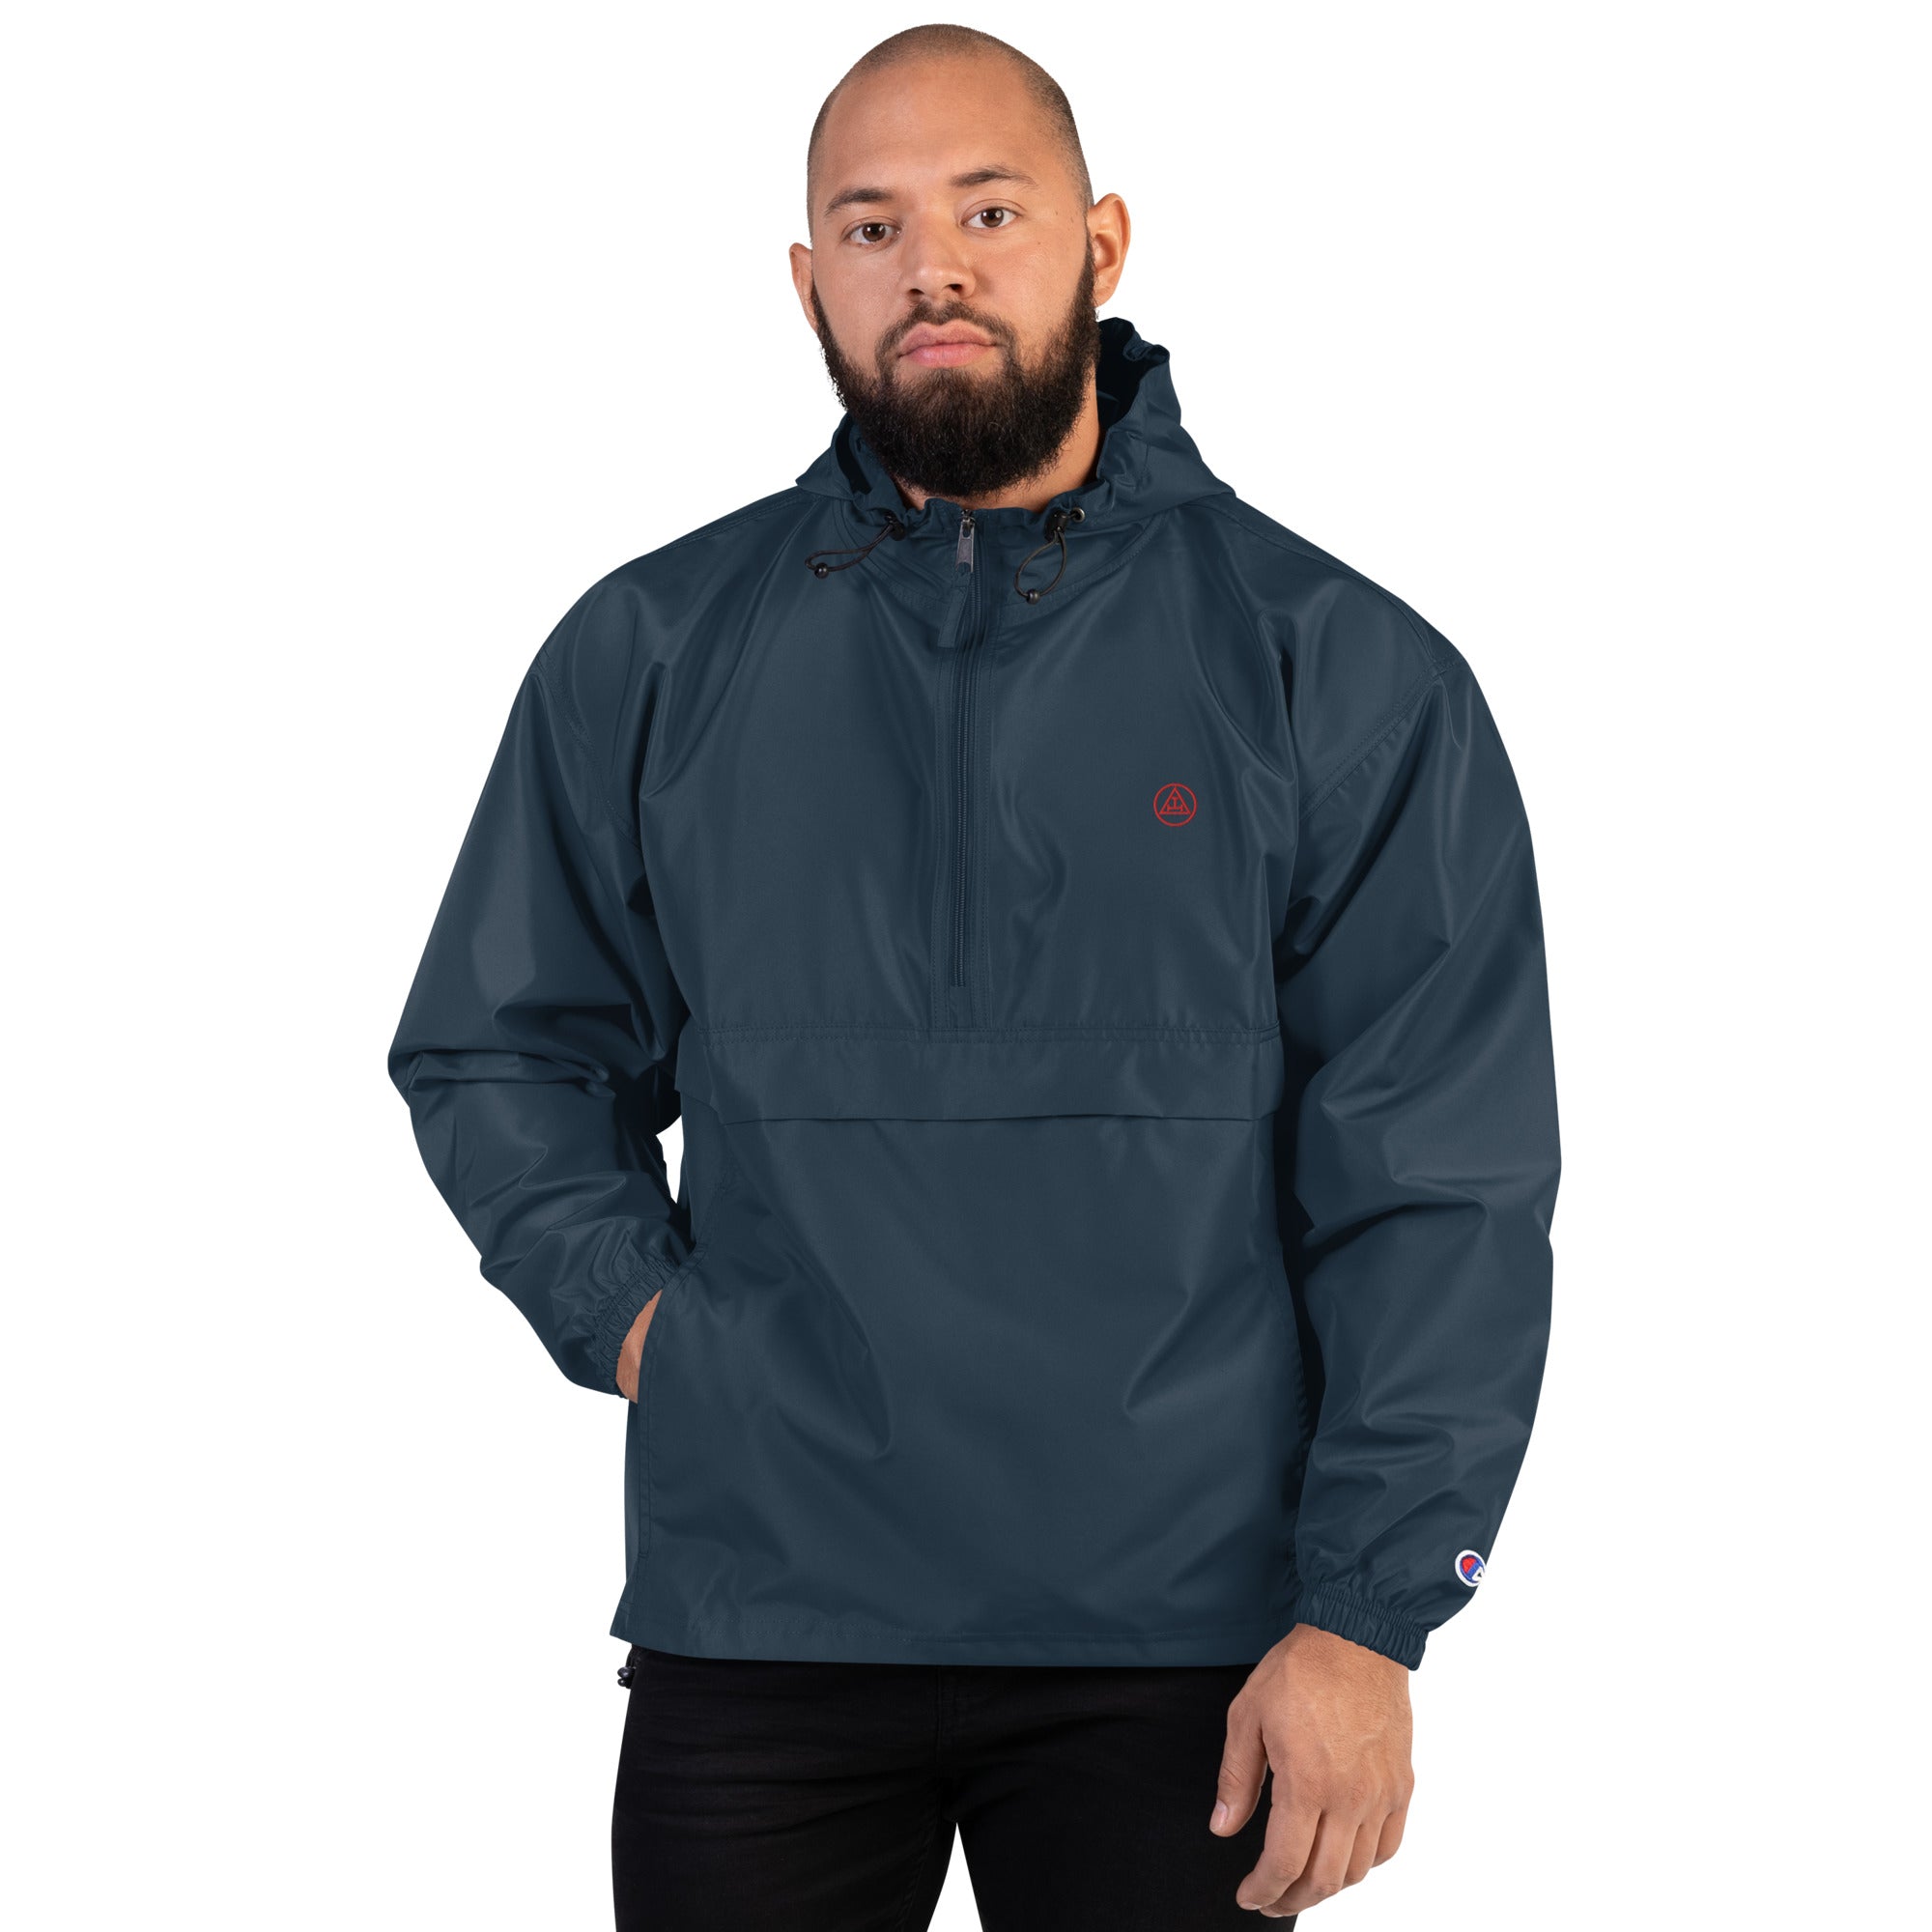 Royal Arch Logo Embroidered Champion Packable Windbreaker